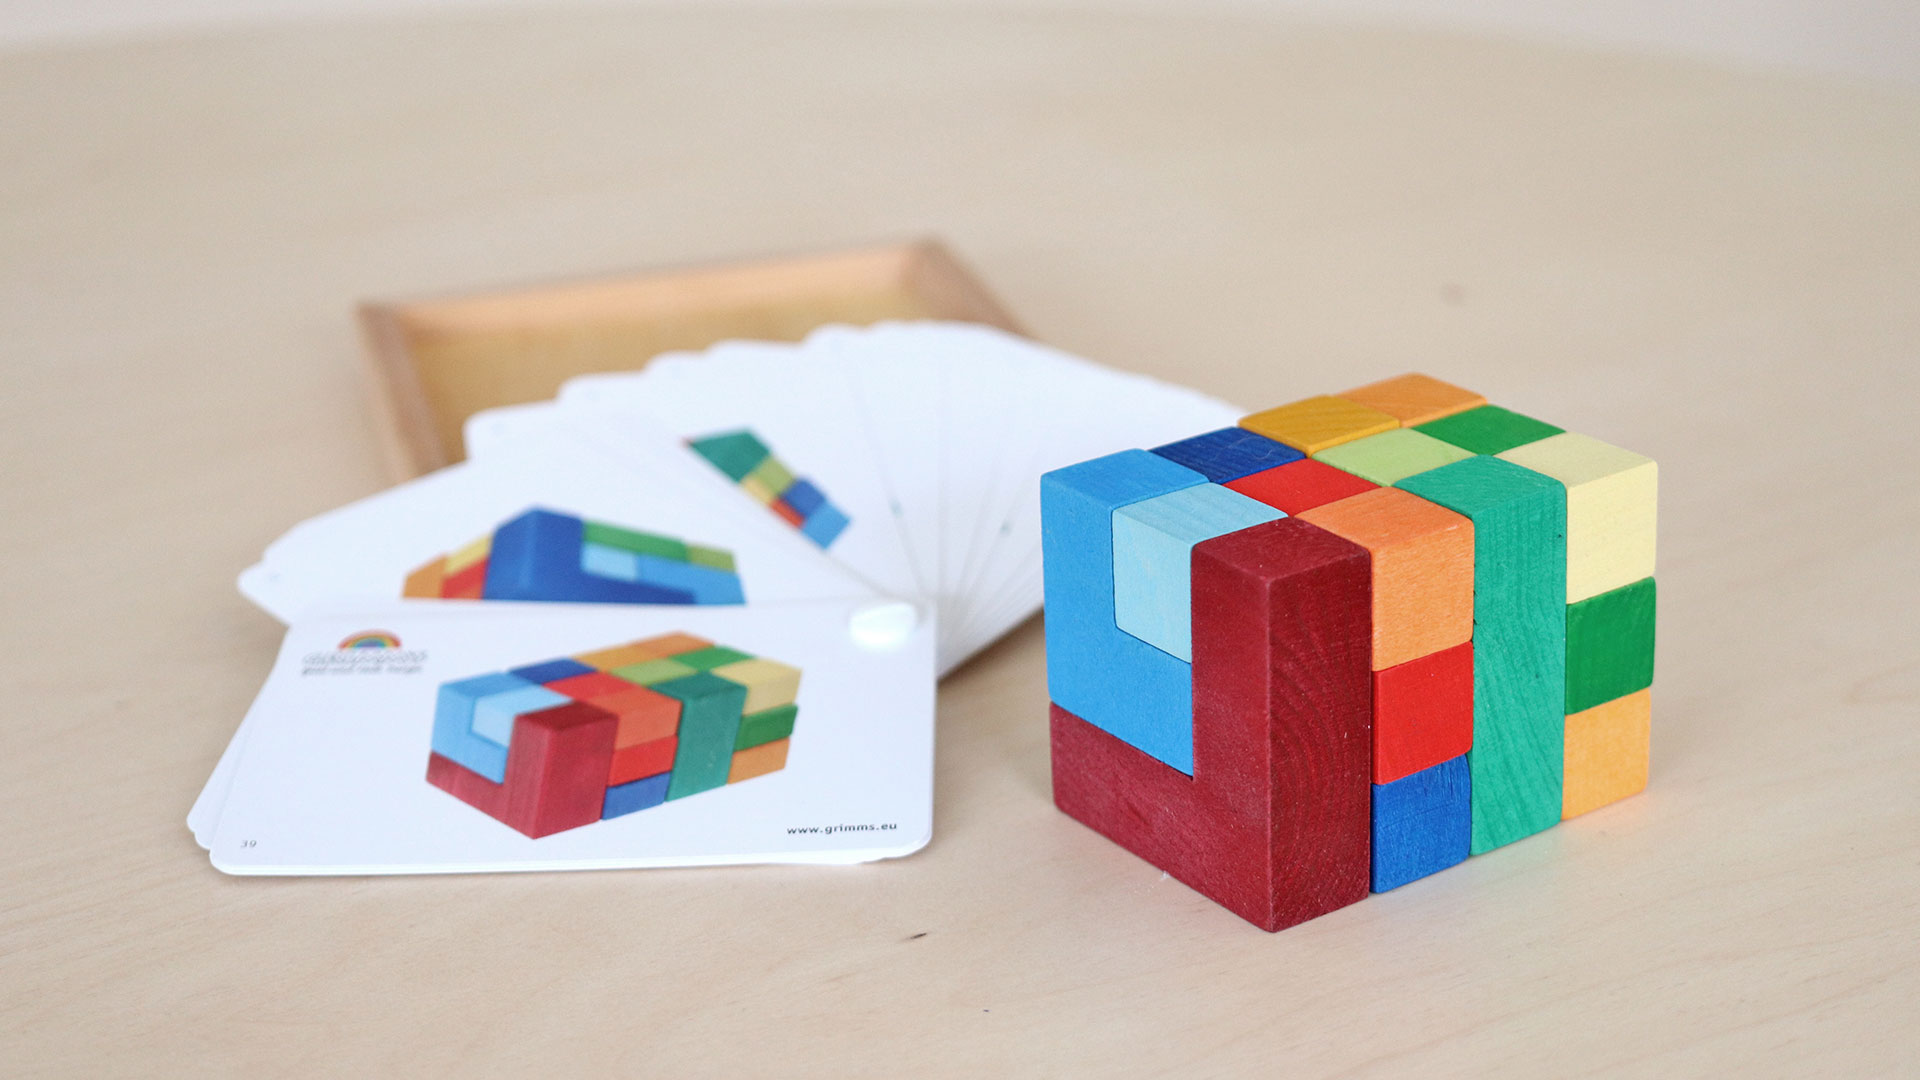 3D wooden block assembled from several colourful wooden bricks.